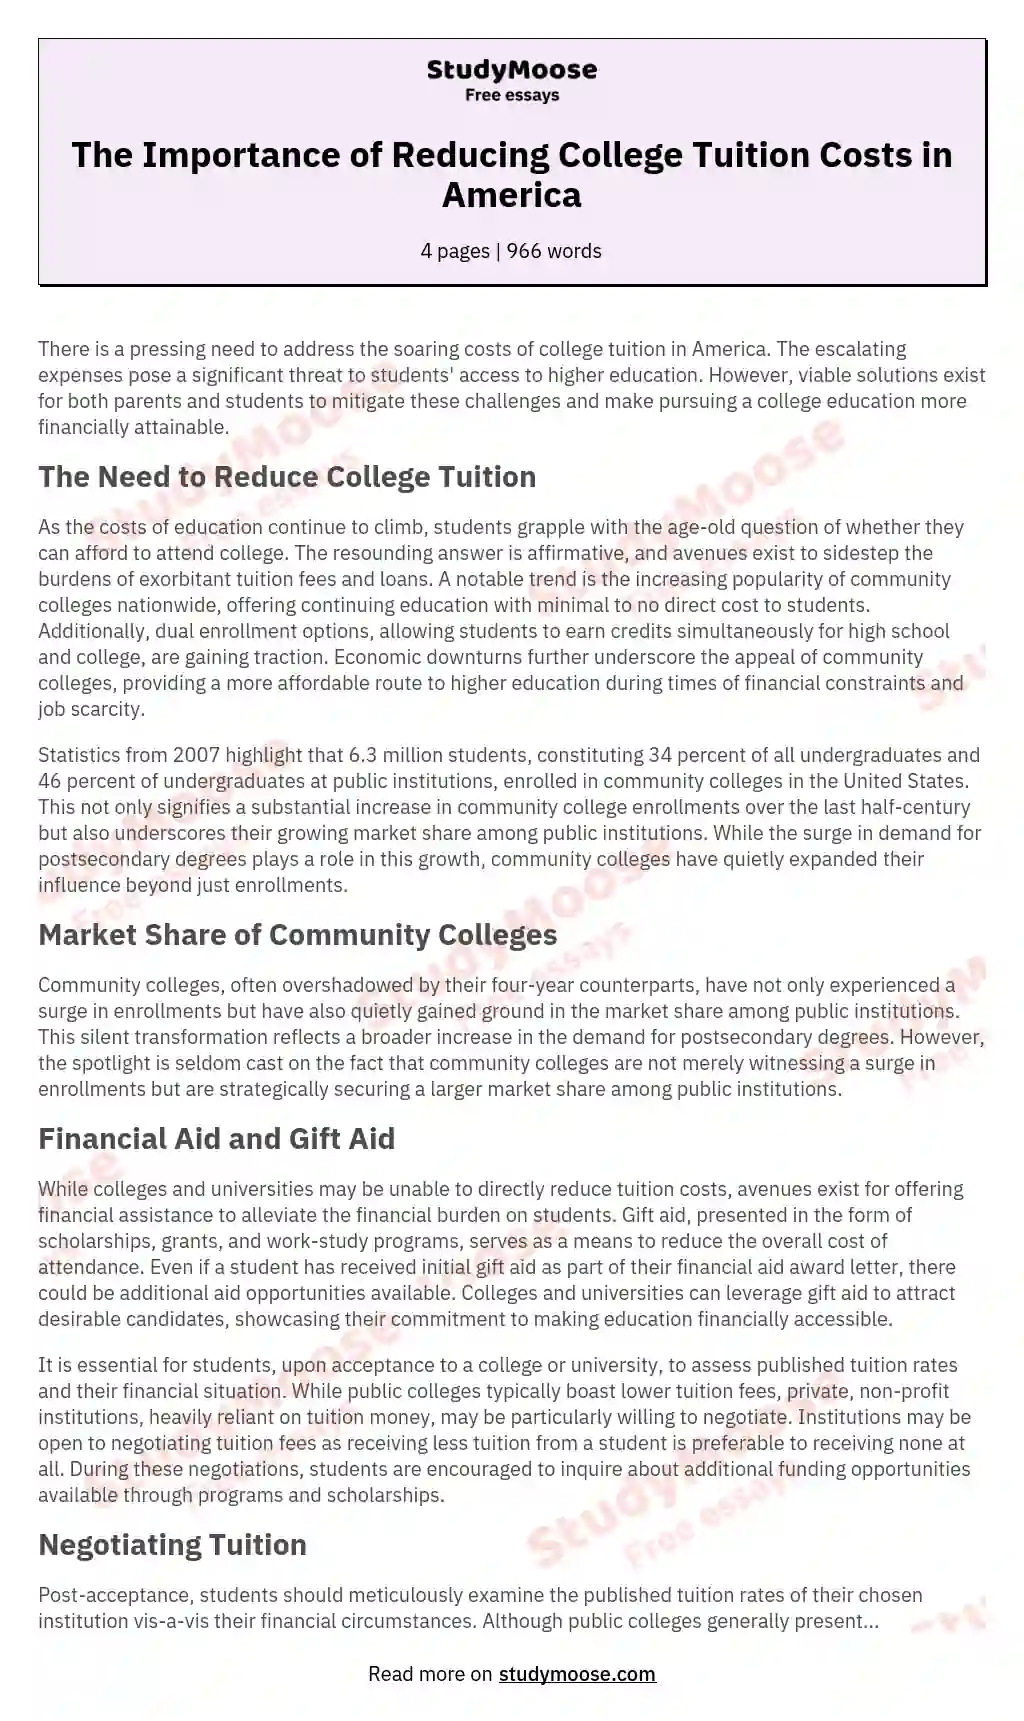 The Importance of Reducing College Tuition Costs in America essay